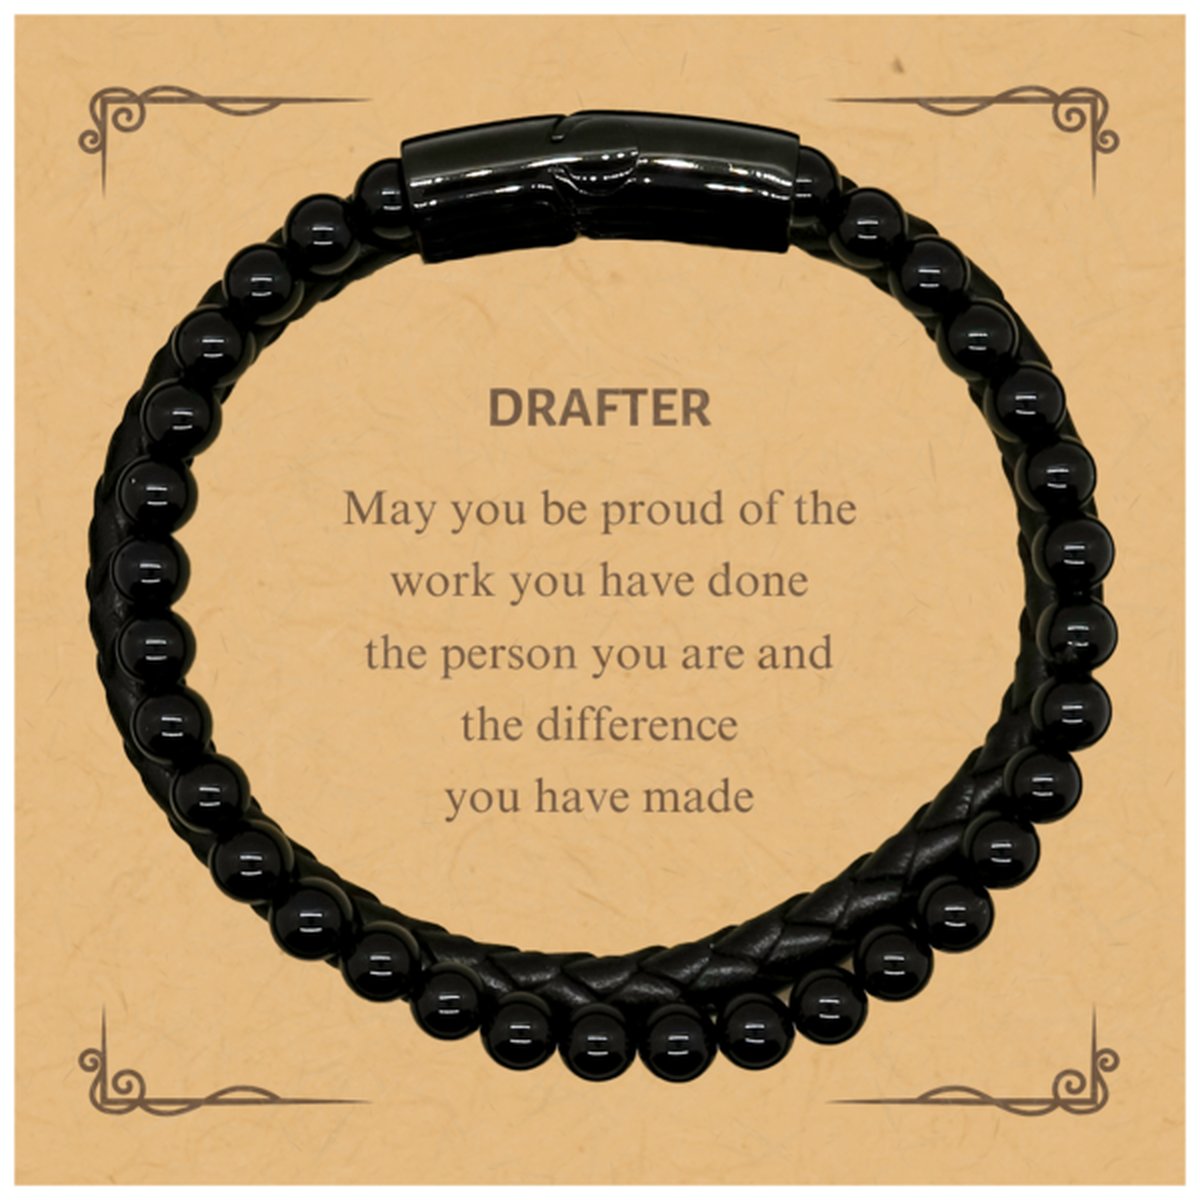 Drafter May you be proud of the work you have done, Retirement Drafter Stone Leather Bracelets for Colleague Appreciation Gifts Amazing for Drafter